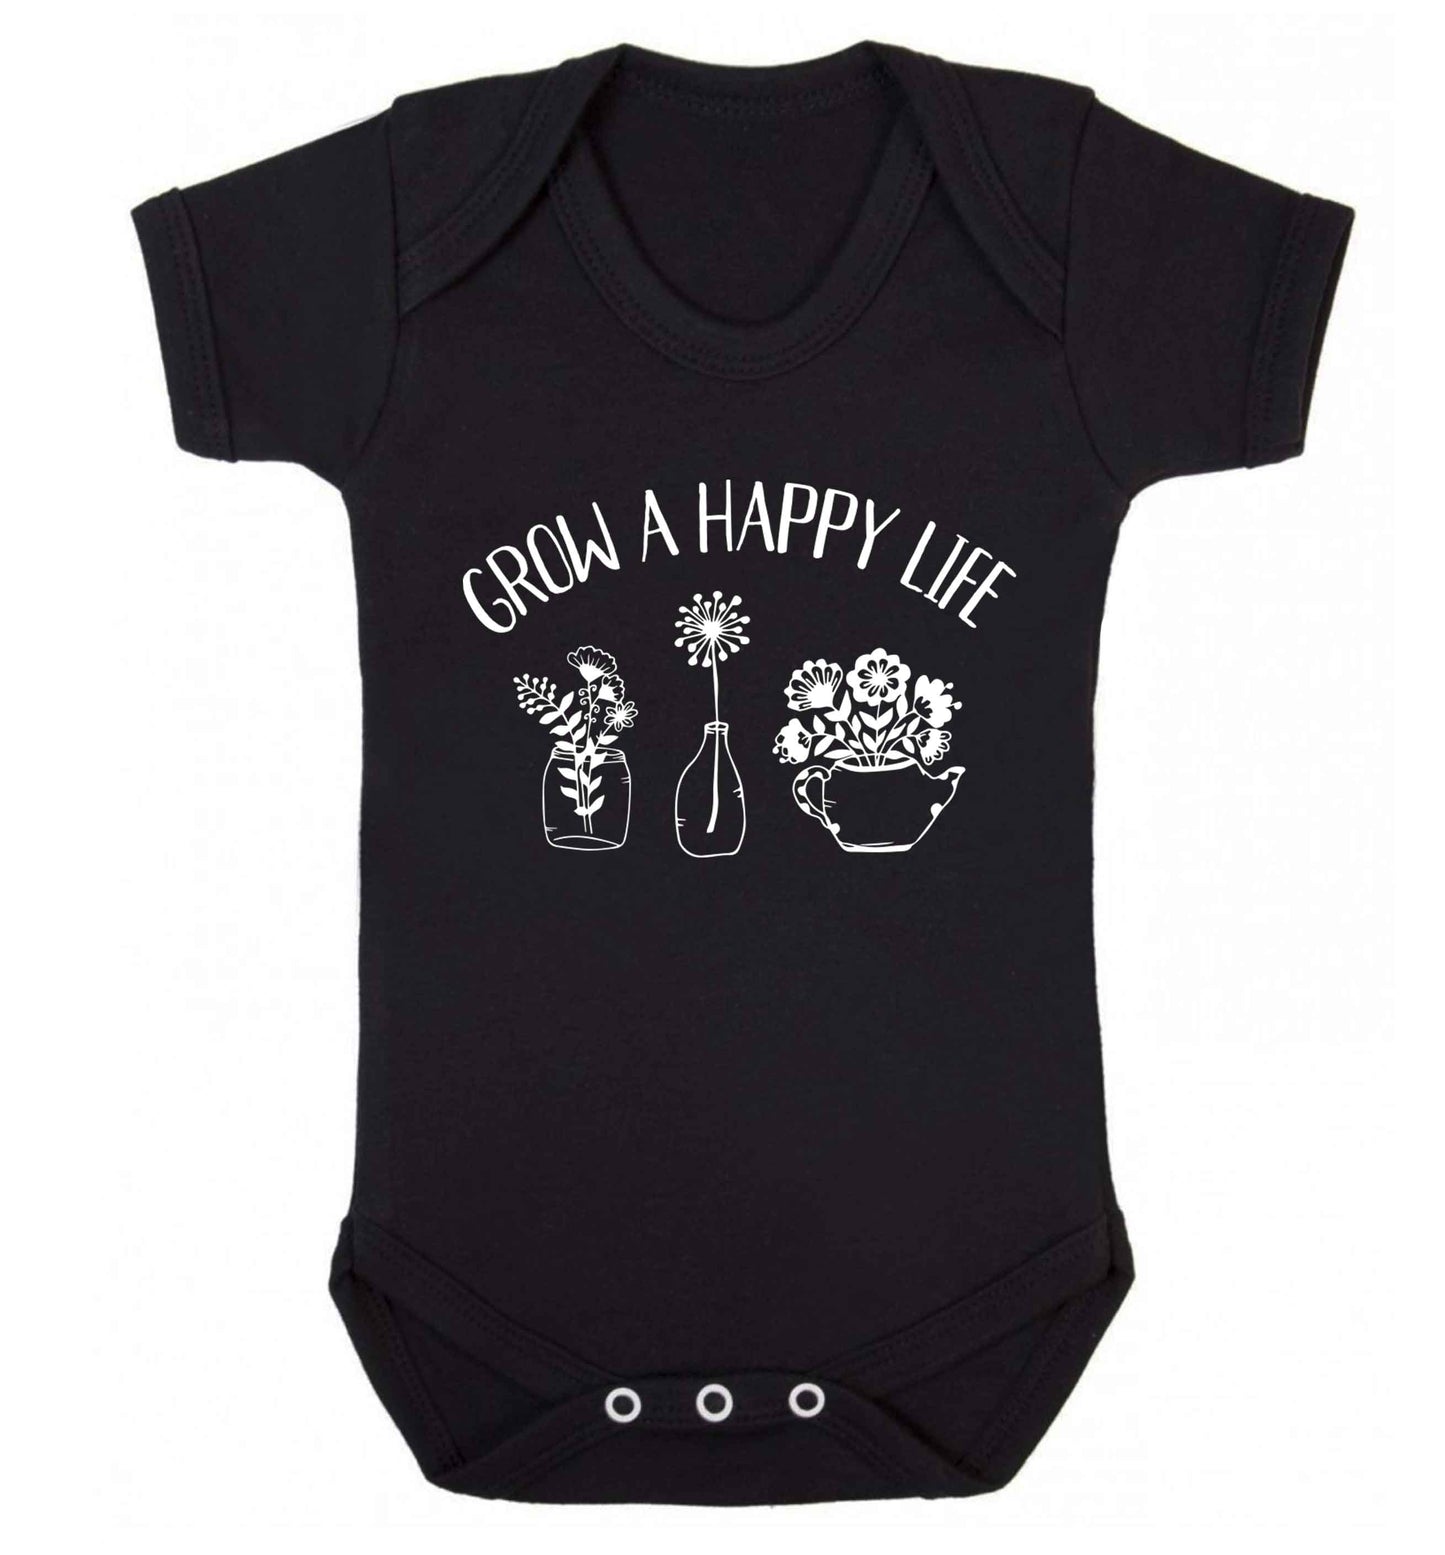 Grow a happy life Baby Vest black 18-24 months